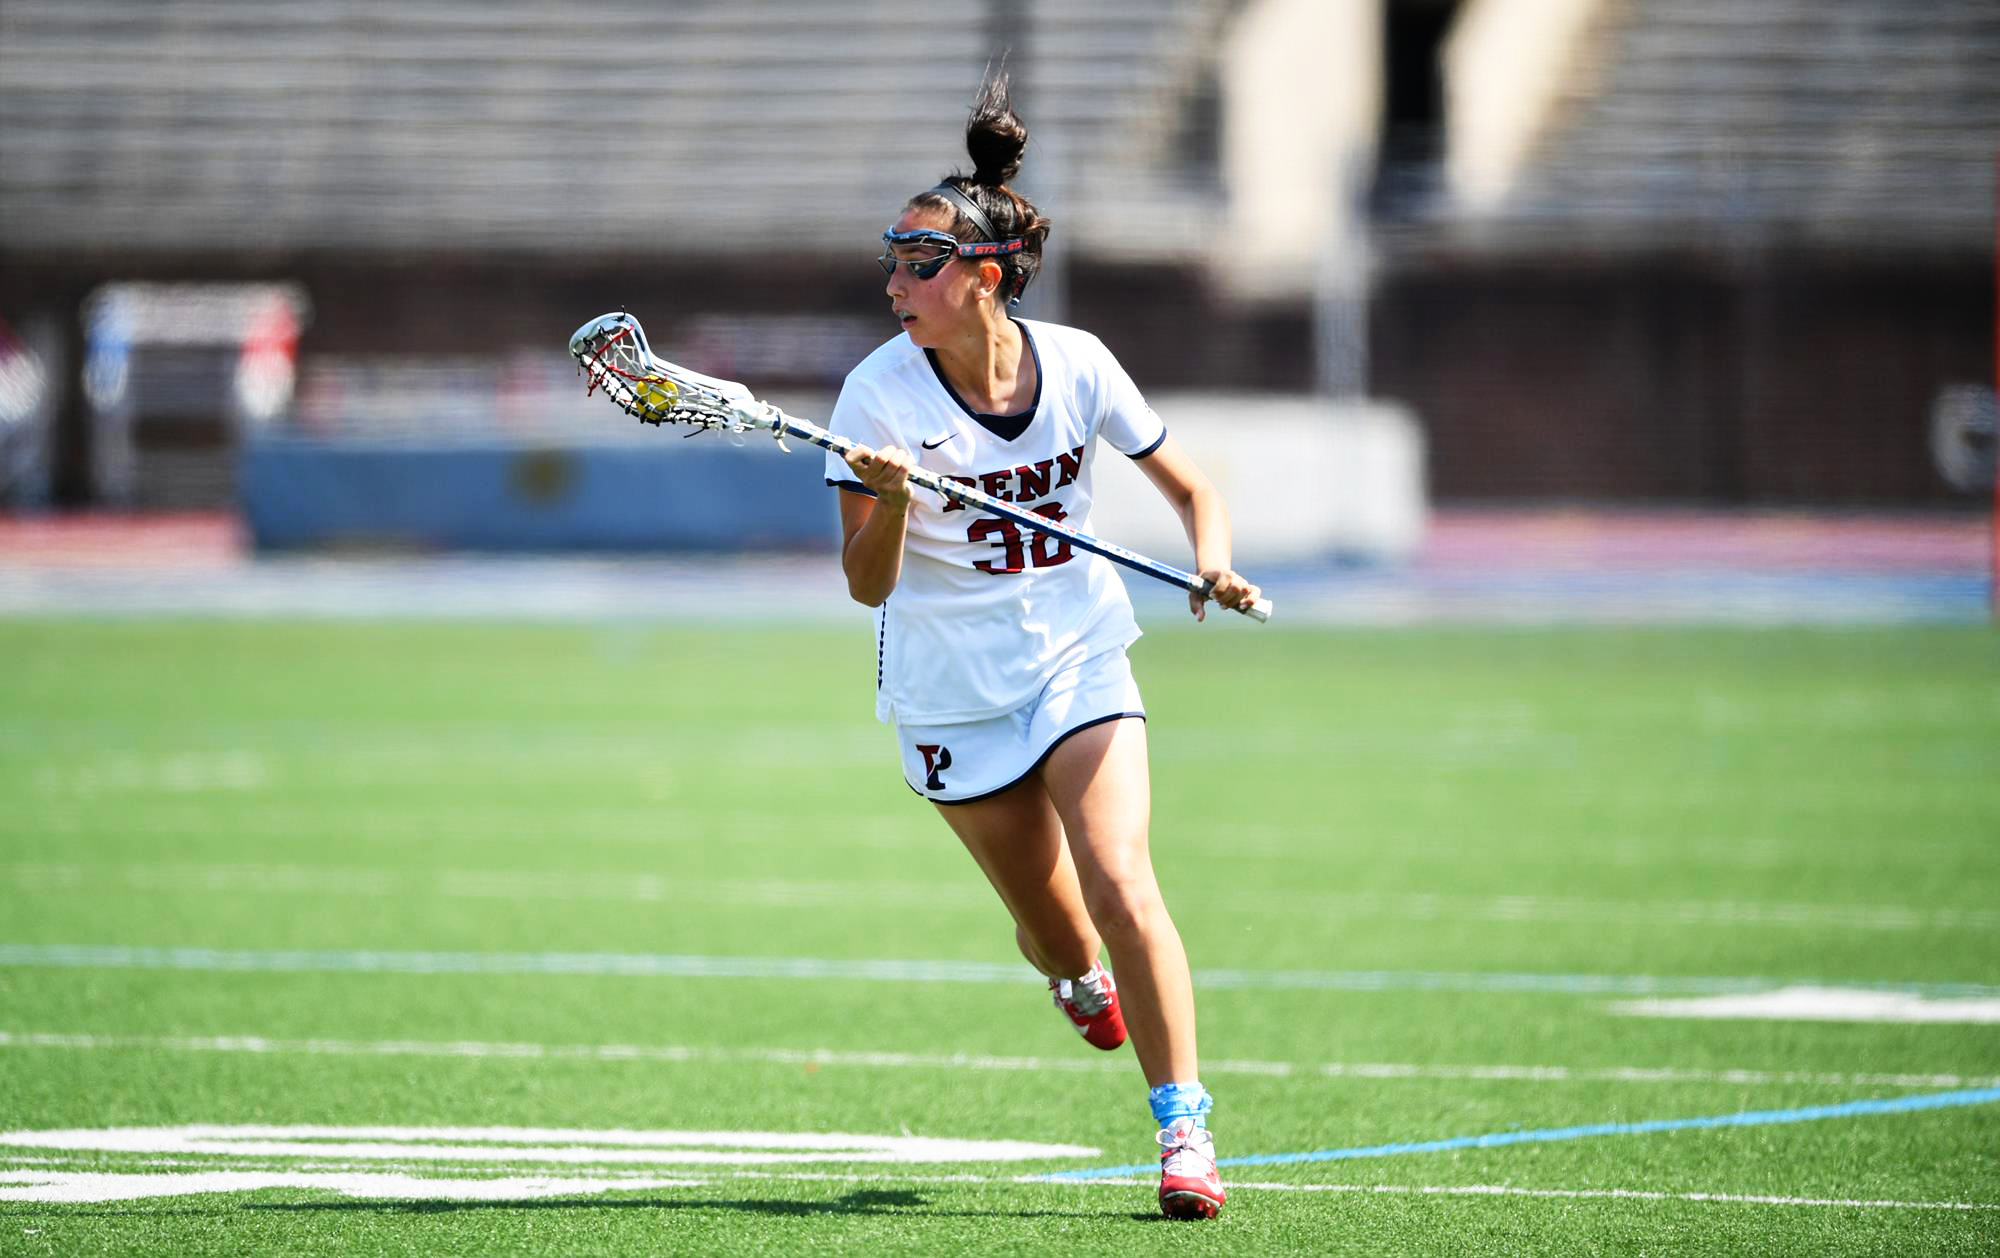 Michaela McMahon of the women's lacrosse runs up the field holding her stick.